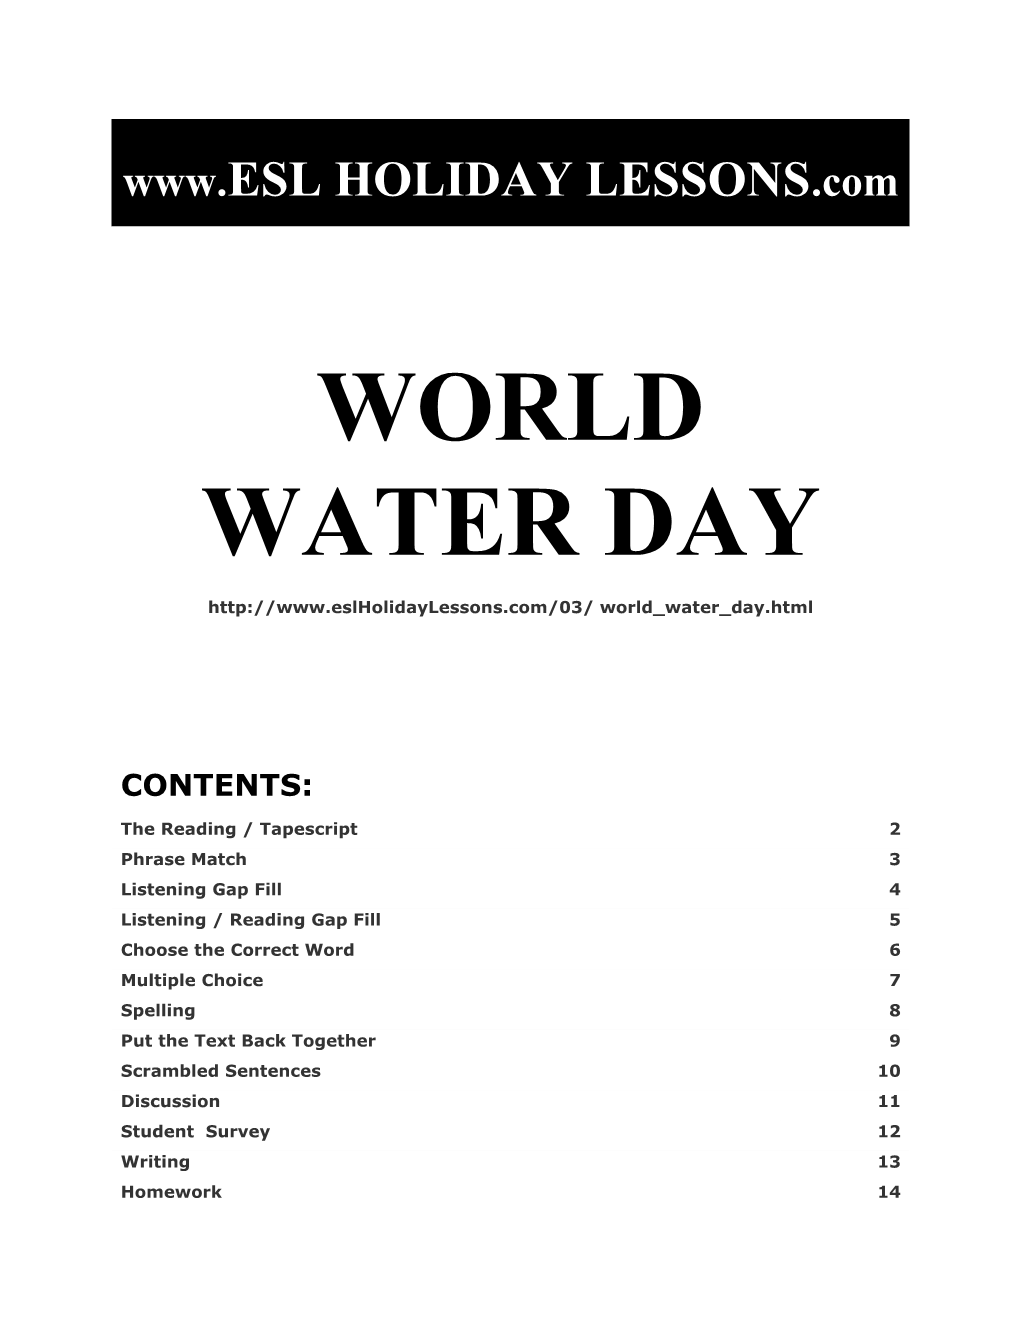 Holiday Lessons - World Water Day